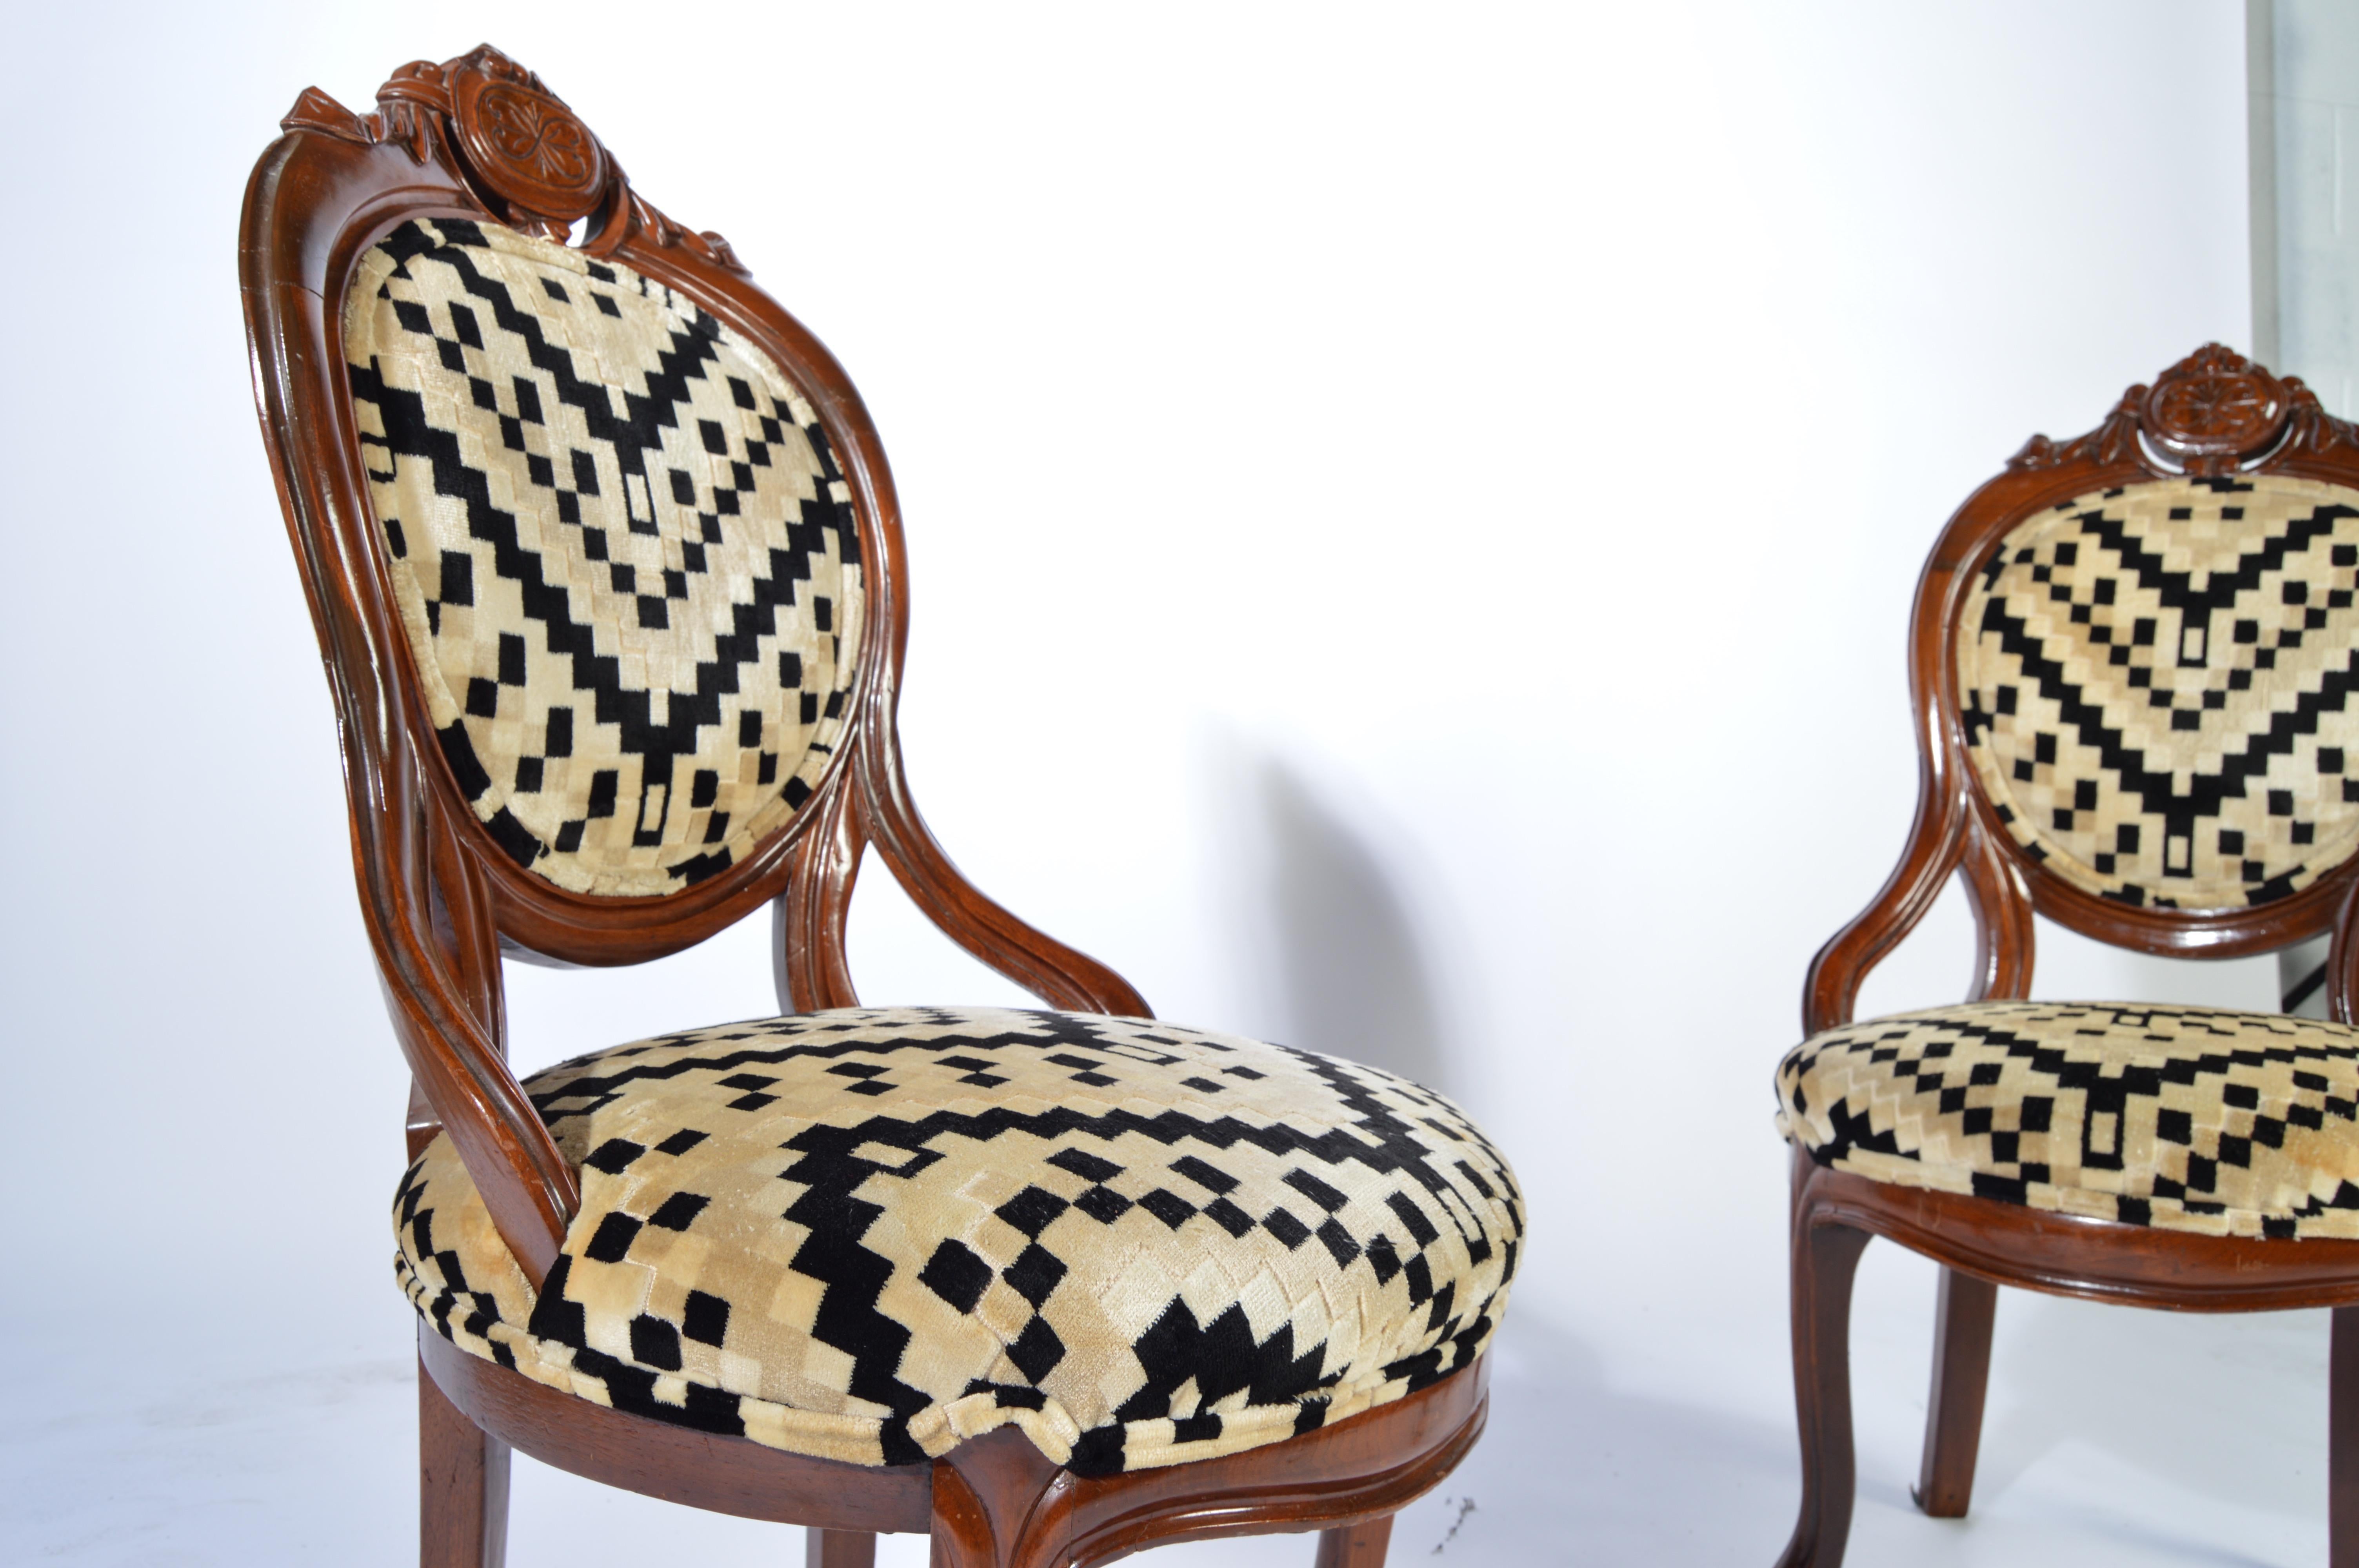 A beautiful antique pair of Victorian parlor chairs having sculpted mahogany frames and stunning original Art Deco velvet upholstery, circa 1930. Absolutely stunning and in fabulous condition having solid frames soft, clean upholstery and firm